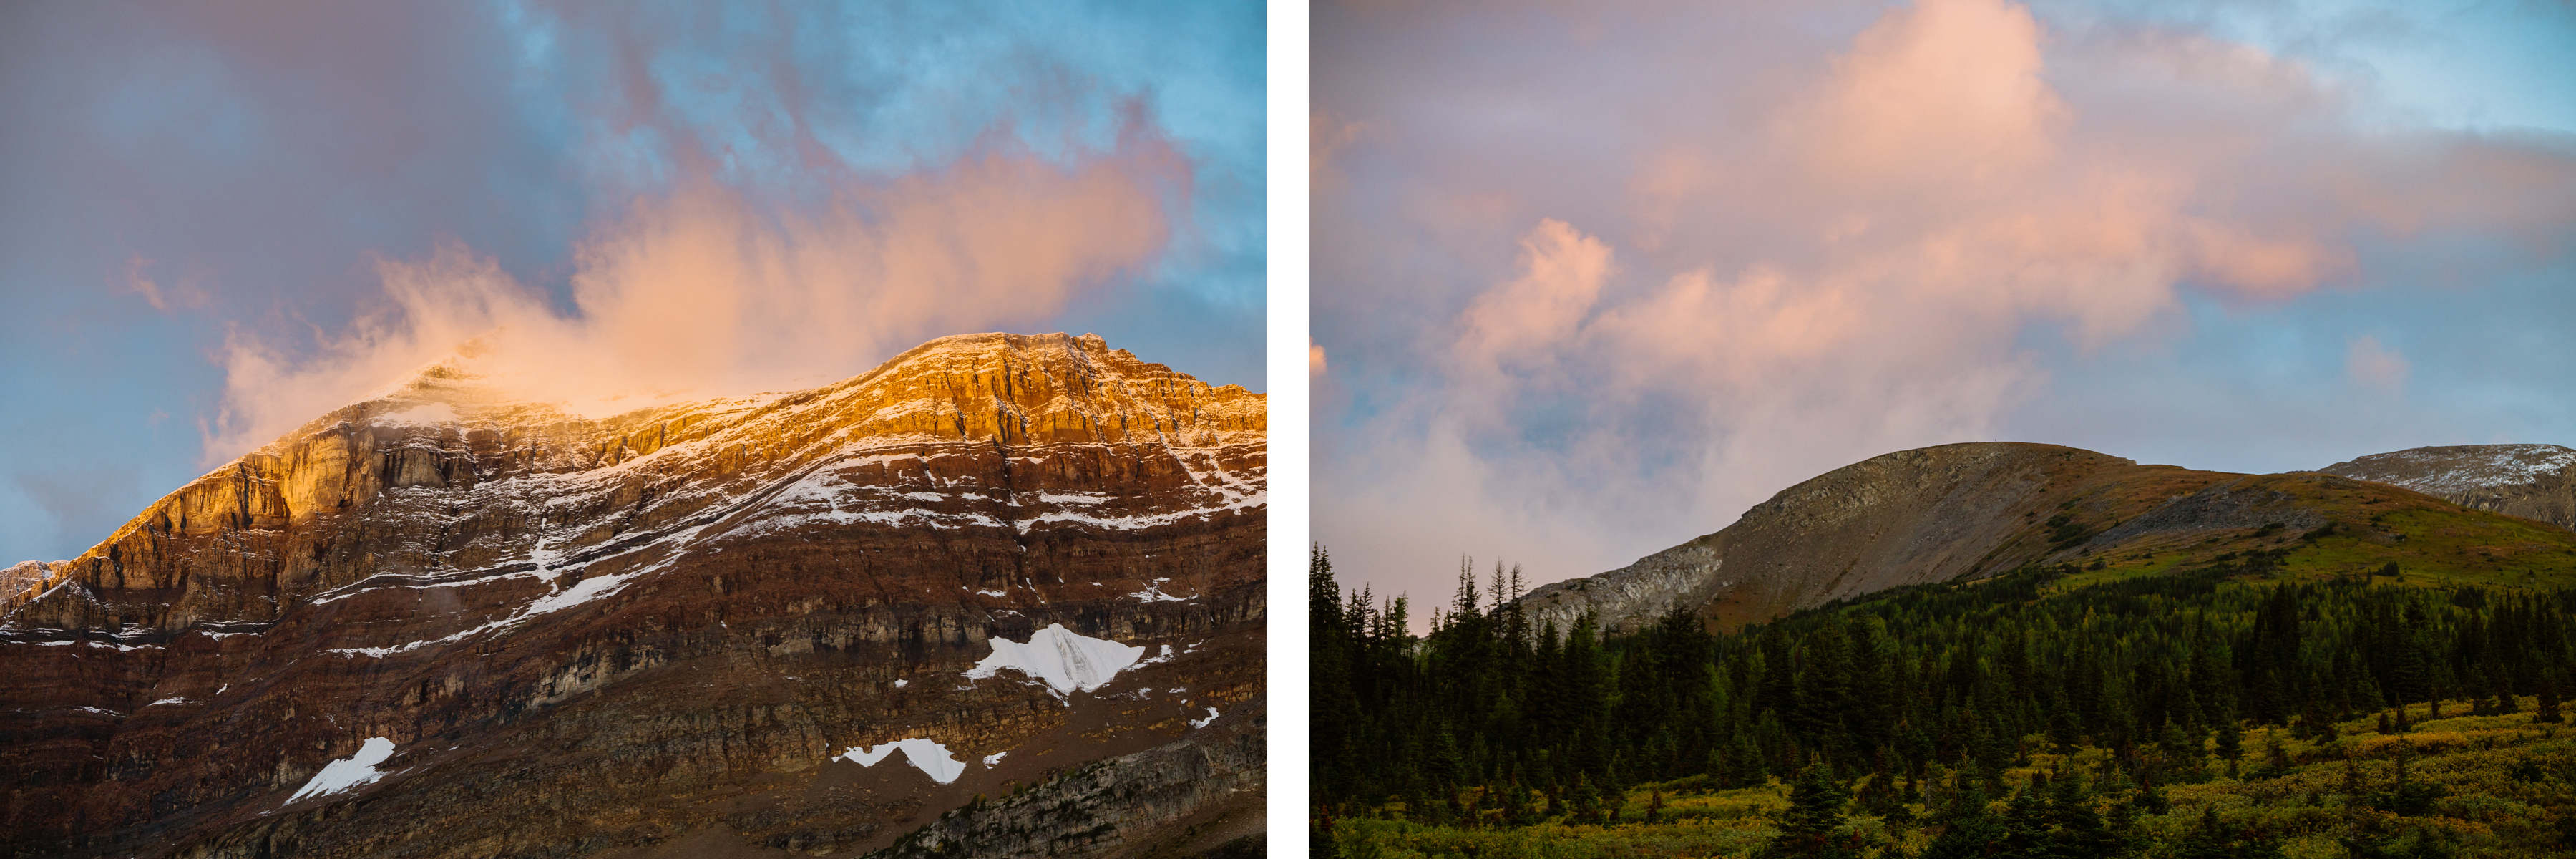 Mount Assiniboine Elopement Photographers at a Backcountry Lodge - Photo 47